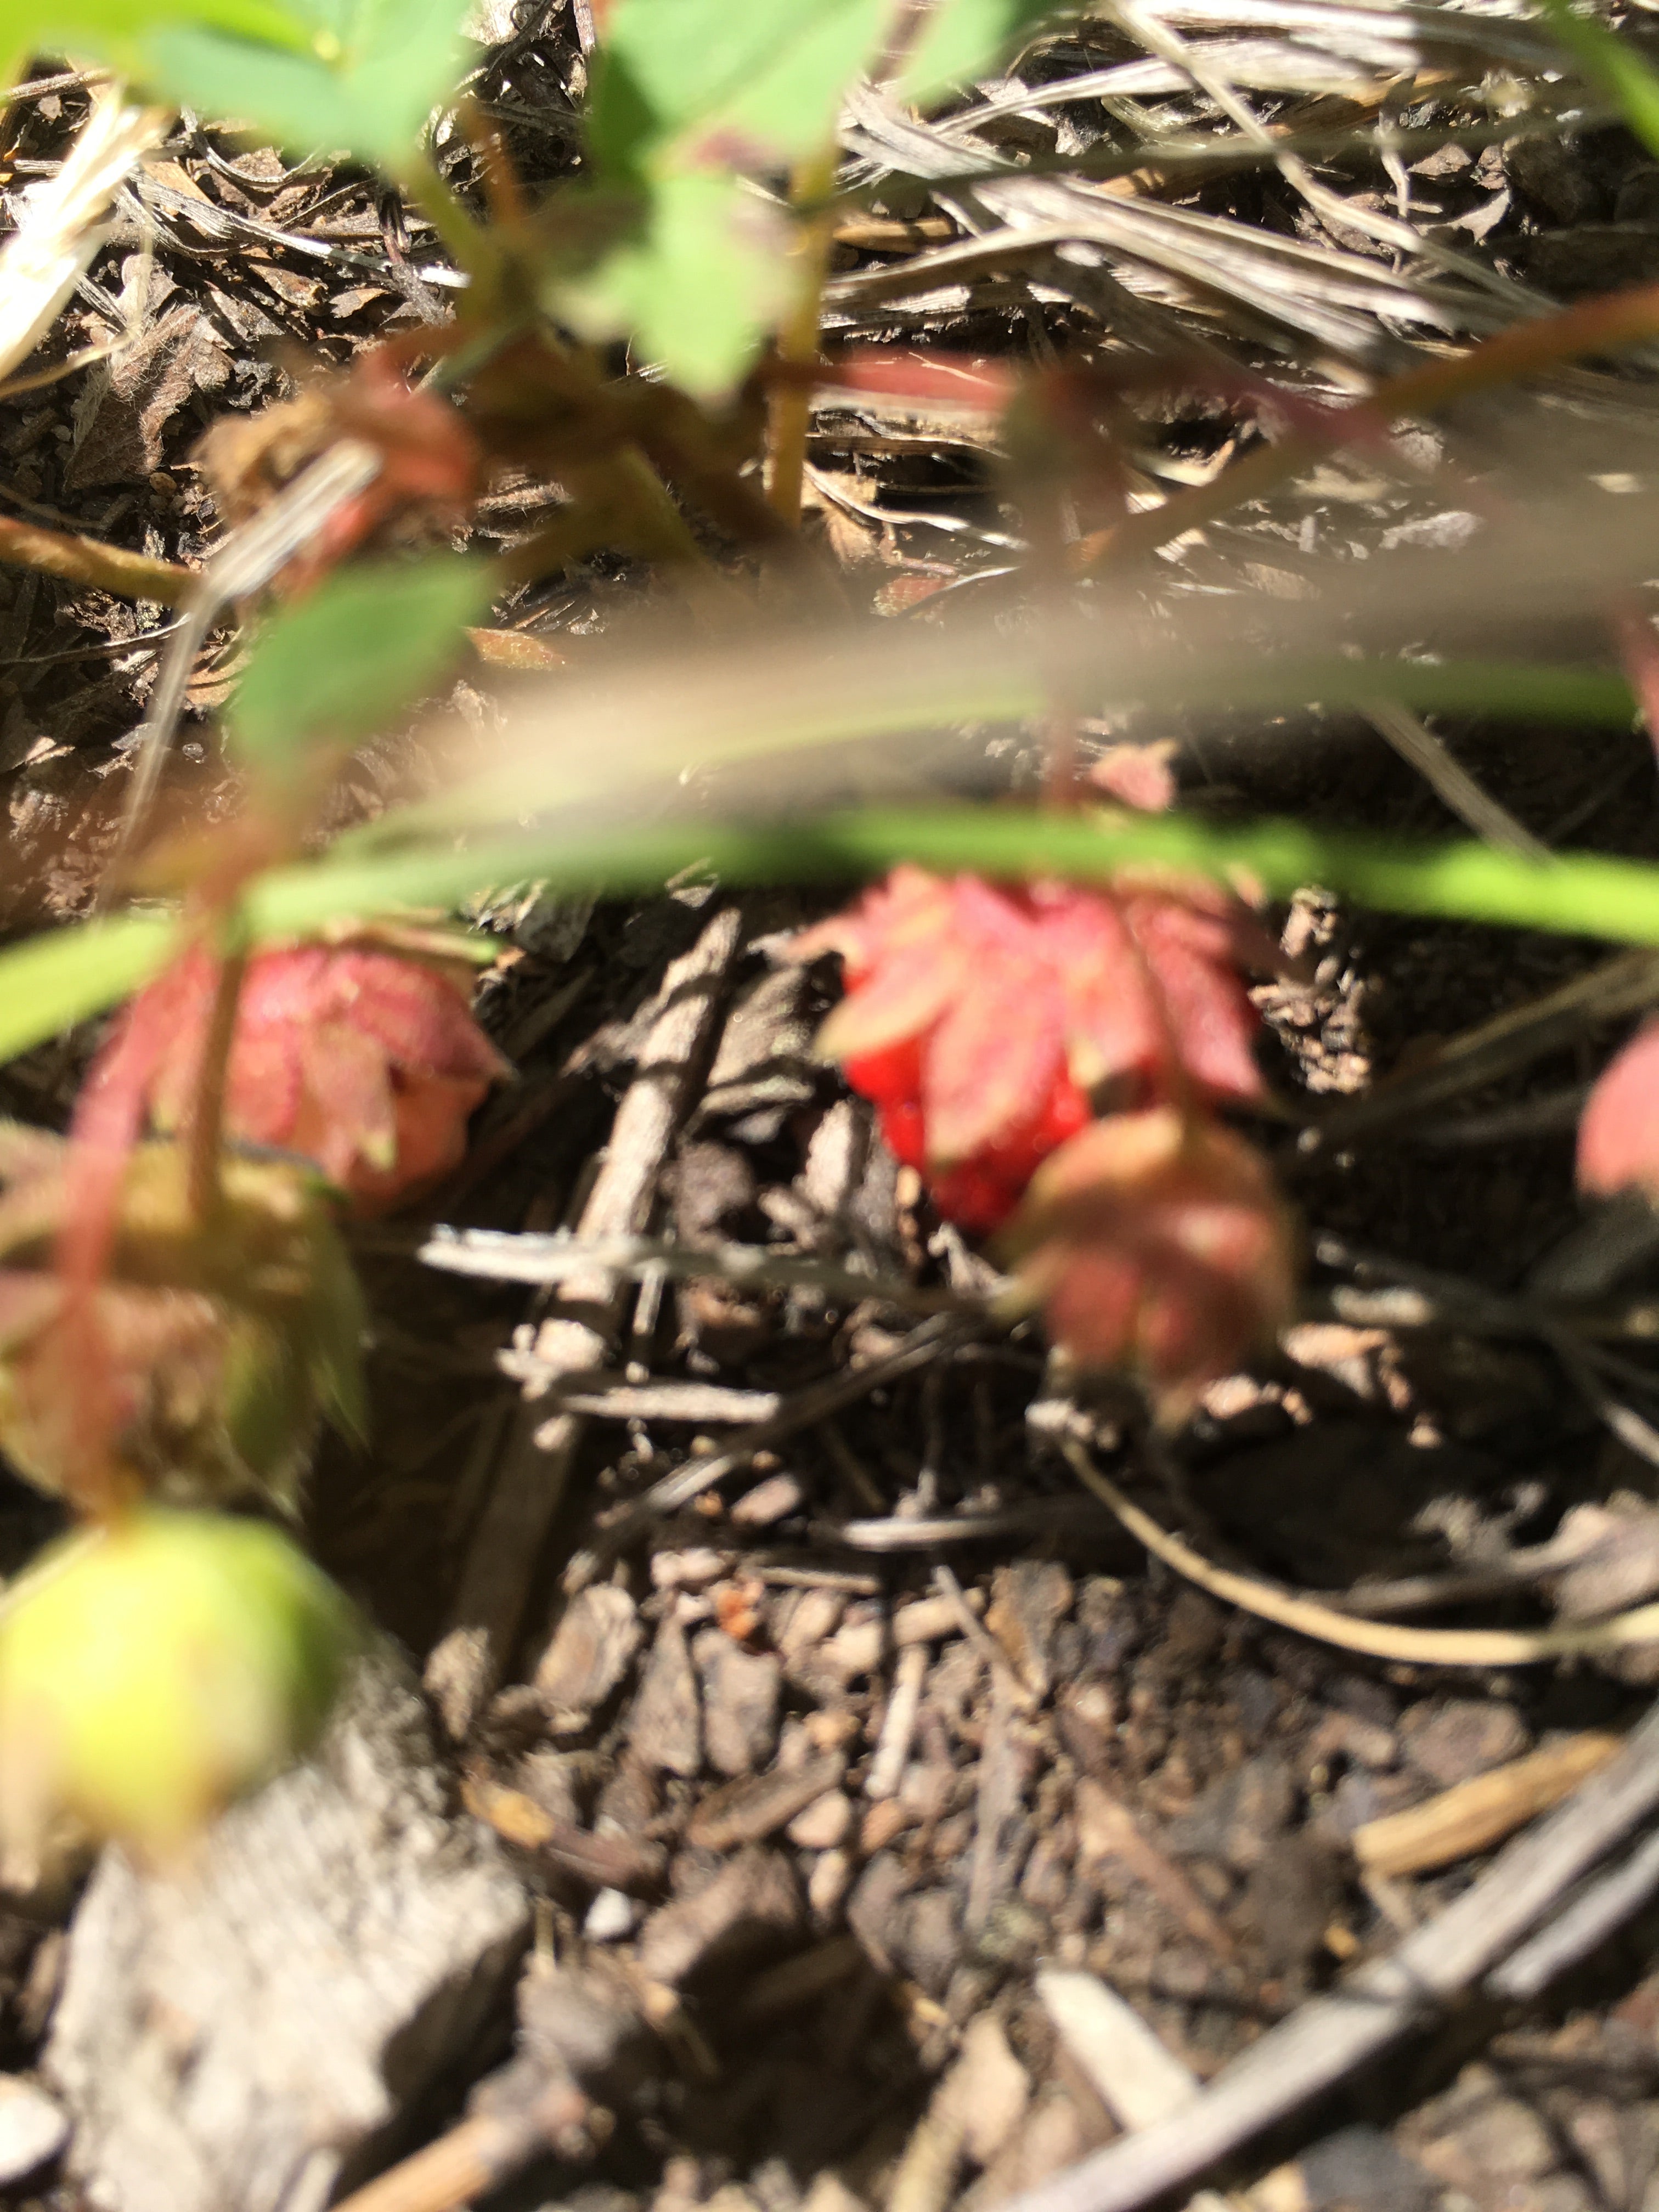 Wild strawberries, also known as bear candy